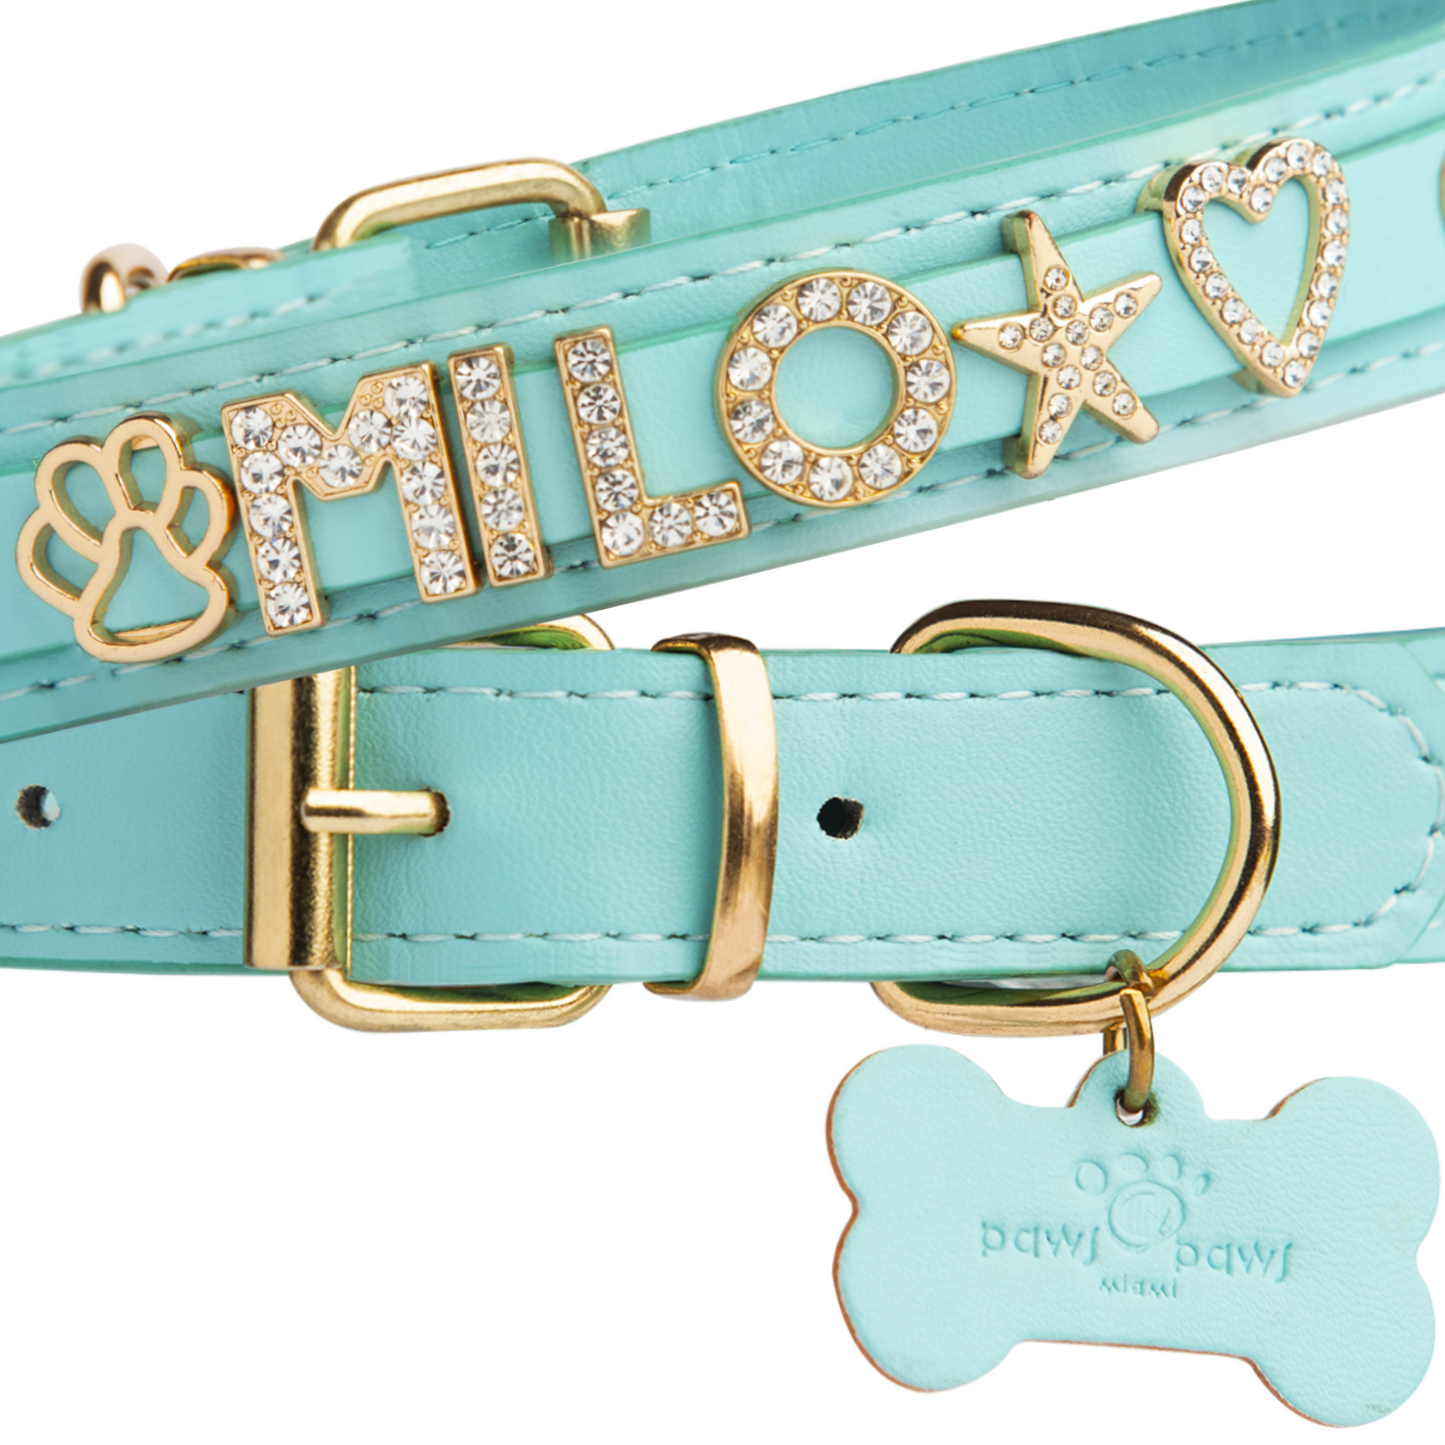 Custom Dog Collars With Studded Jewelry in Bundle